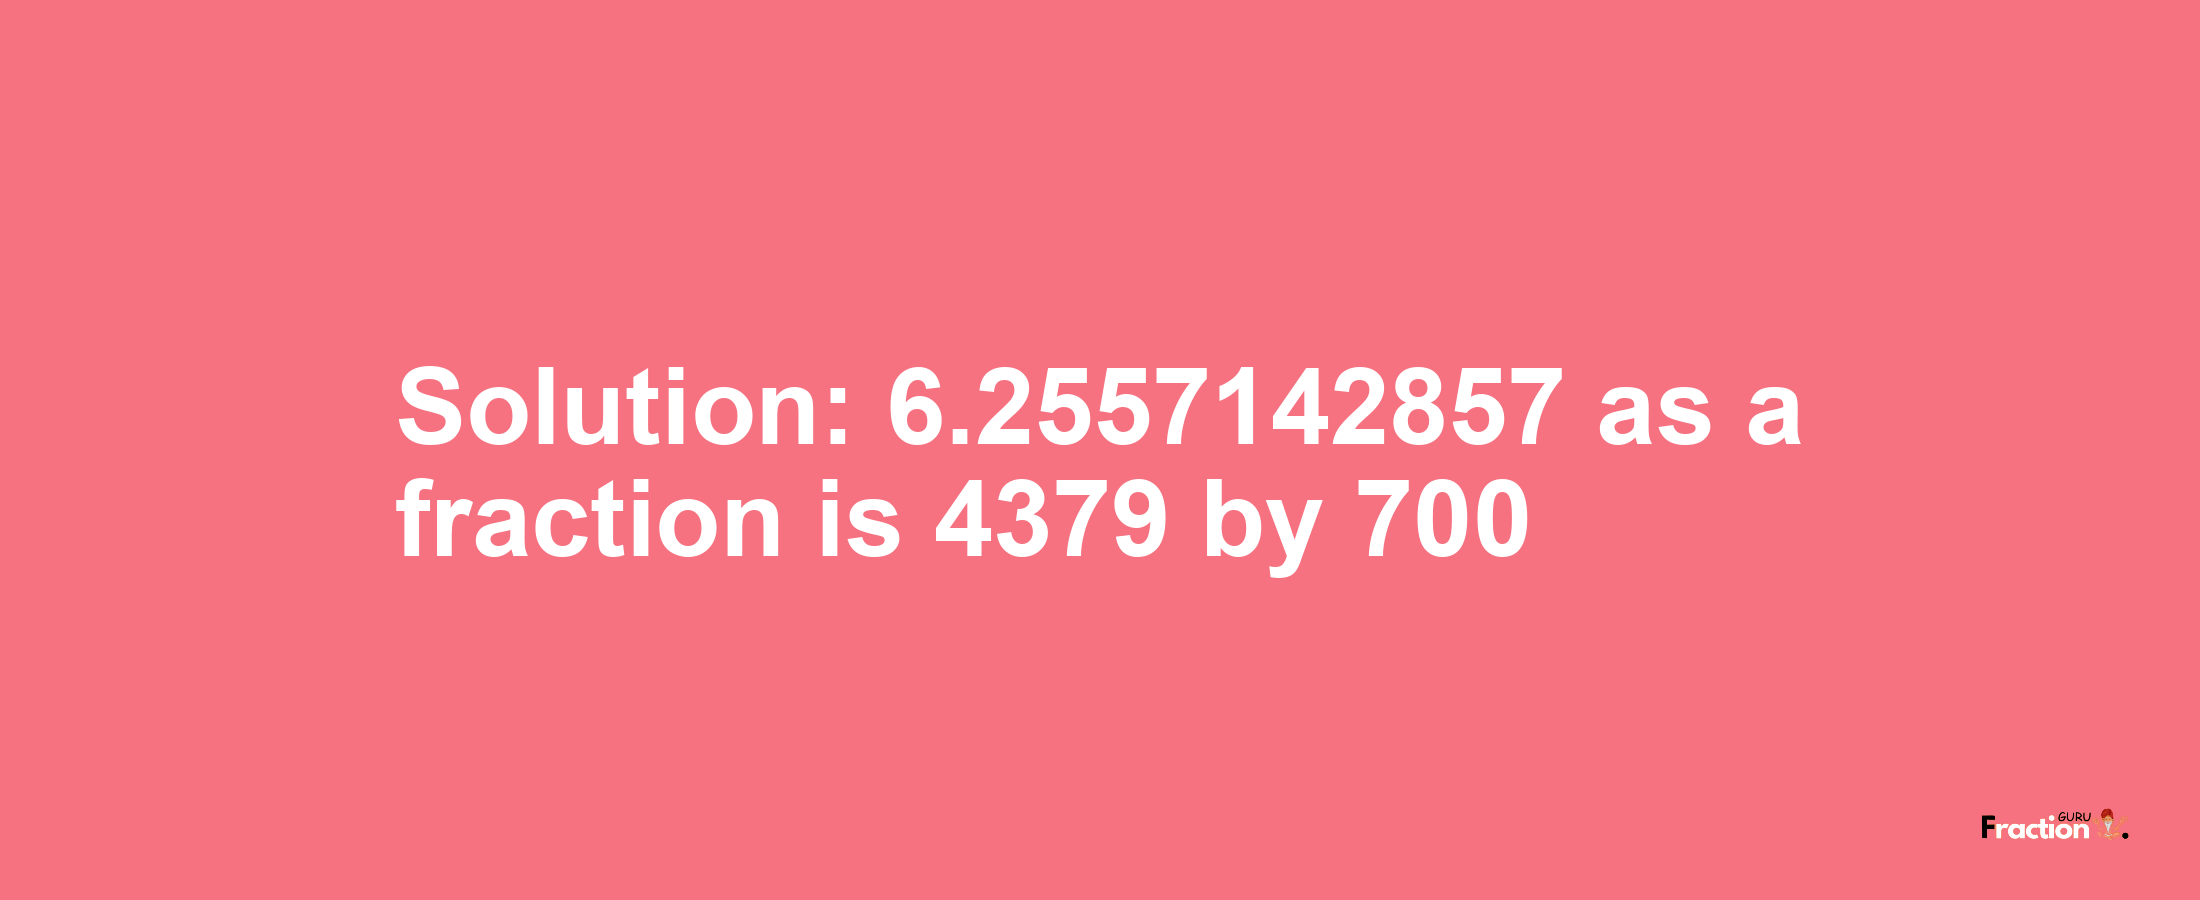 Solution:6.2557142857 as a fraction is 4379/700